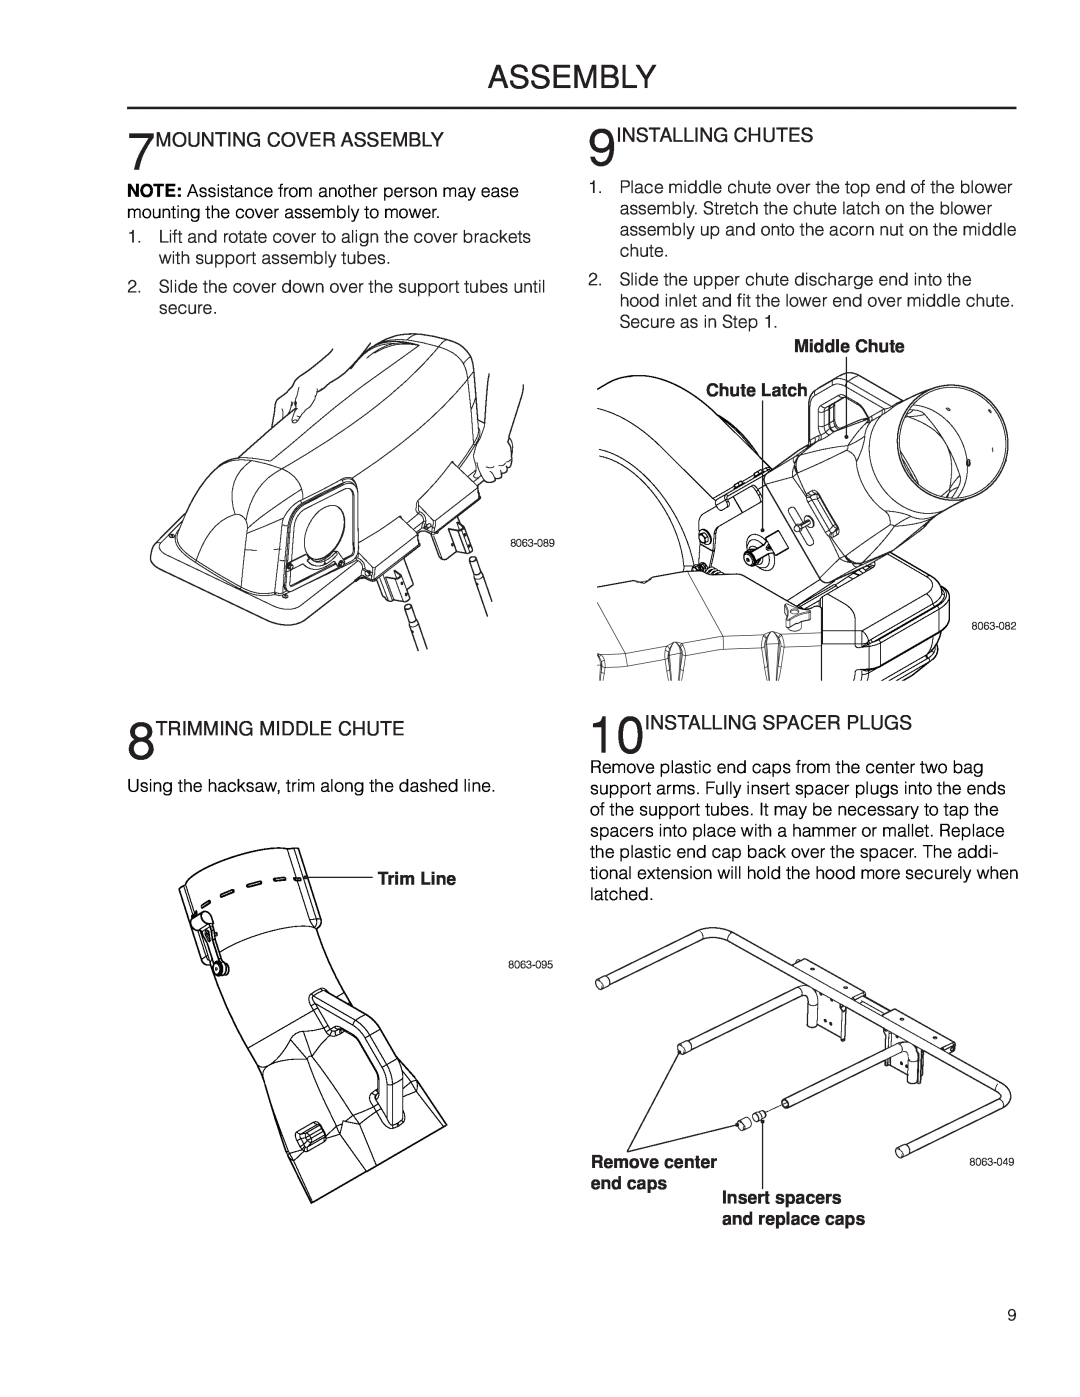 Husqvarna 966529103 manual 7MOUNTING COVER ASSEMBLY, 9INSTALLING CHUTES, 8TRIMMING MIDDLE CHUTE, 10INSTALLING SPACER PLUGS 